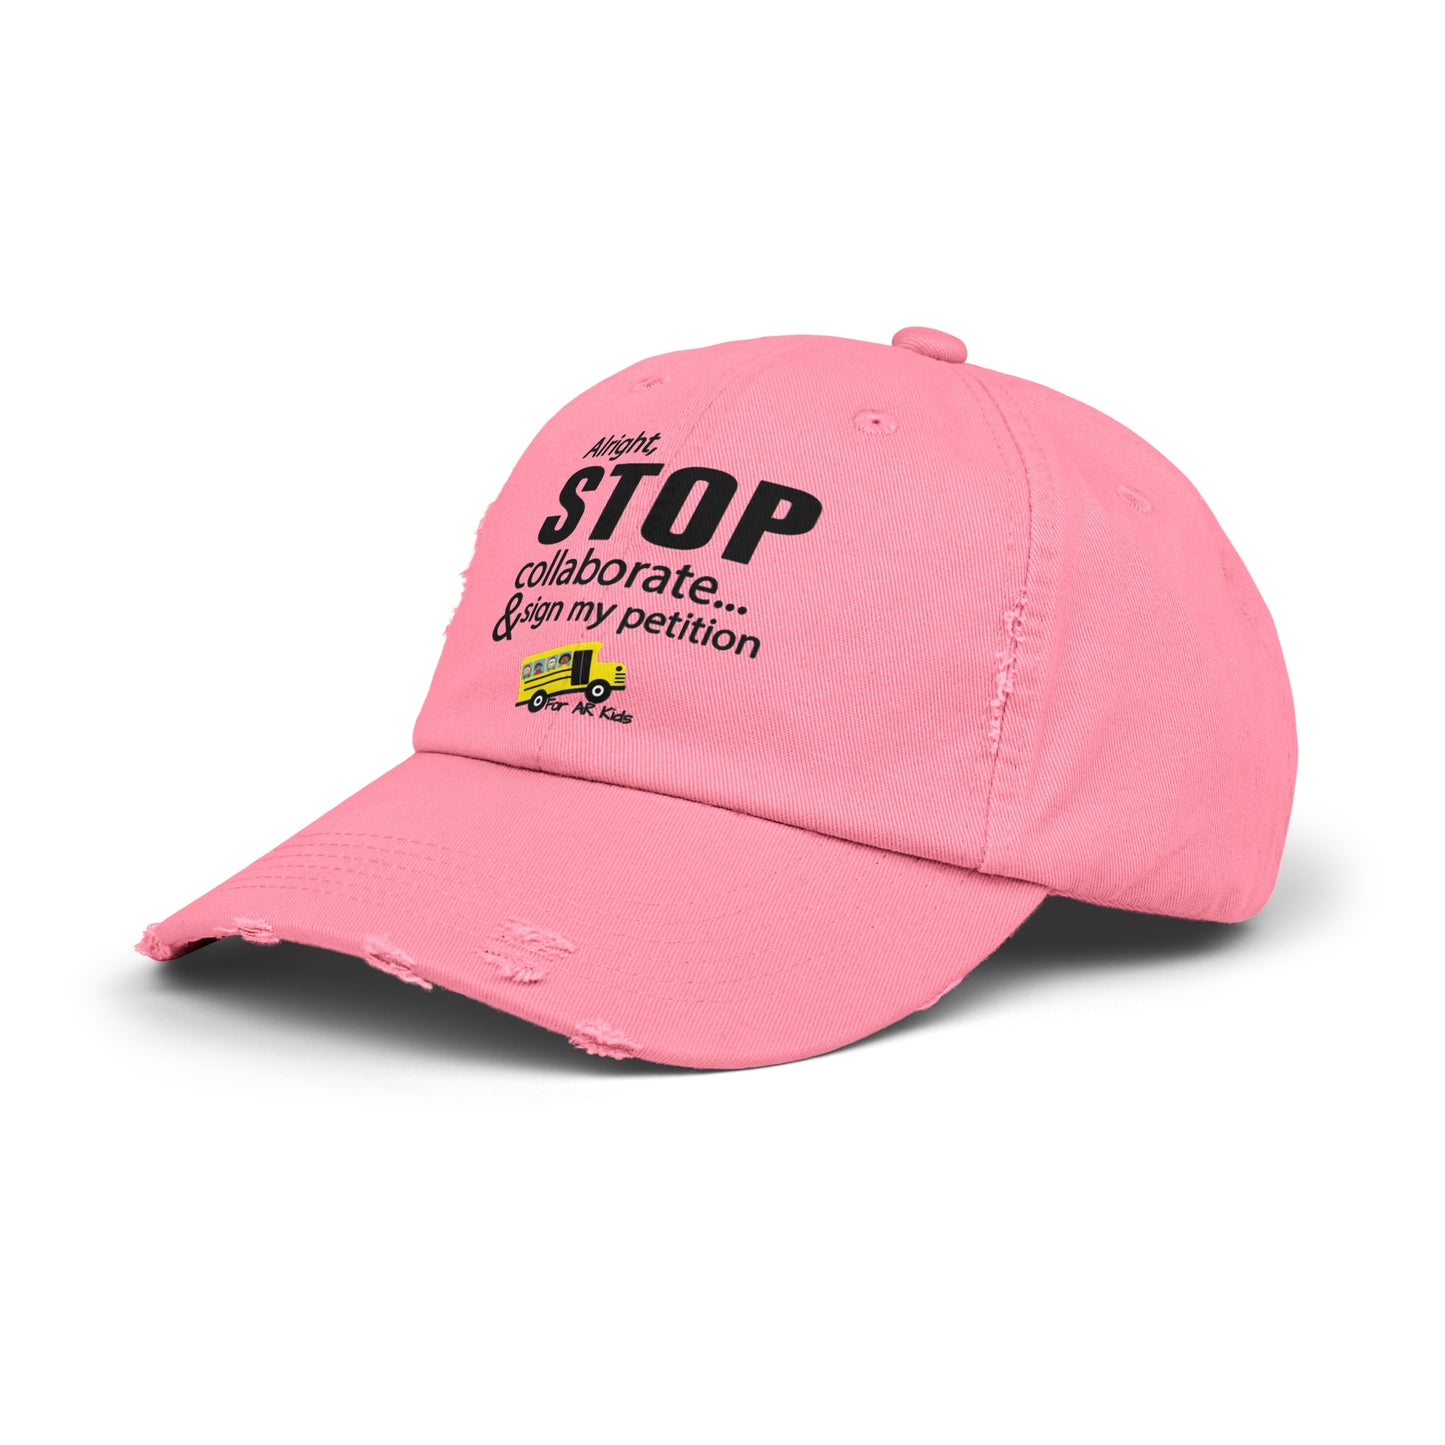 Alright Stop Collaborate and Sign My Petition Baseball Cap, AR Kids Hat, Distressed Cap